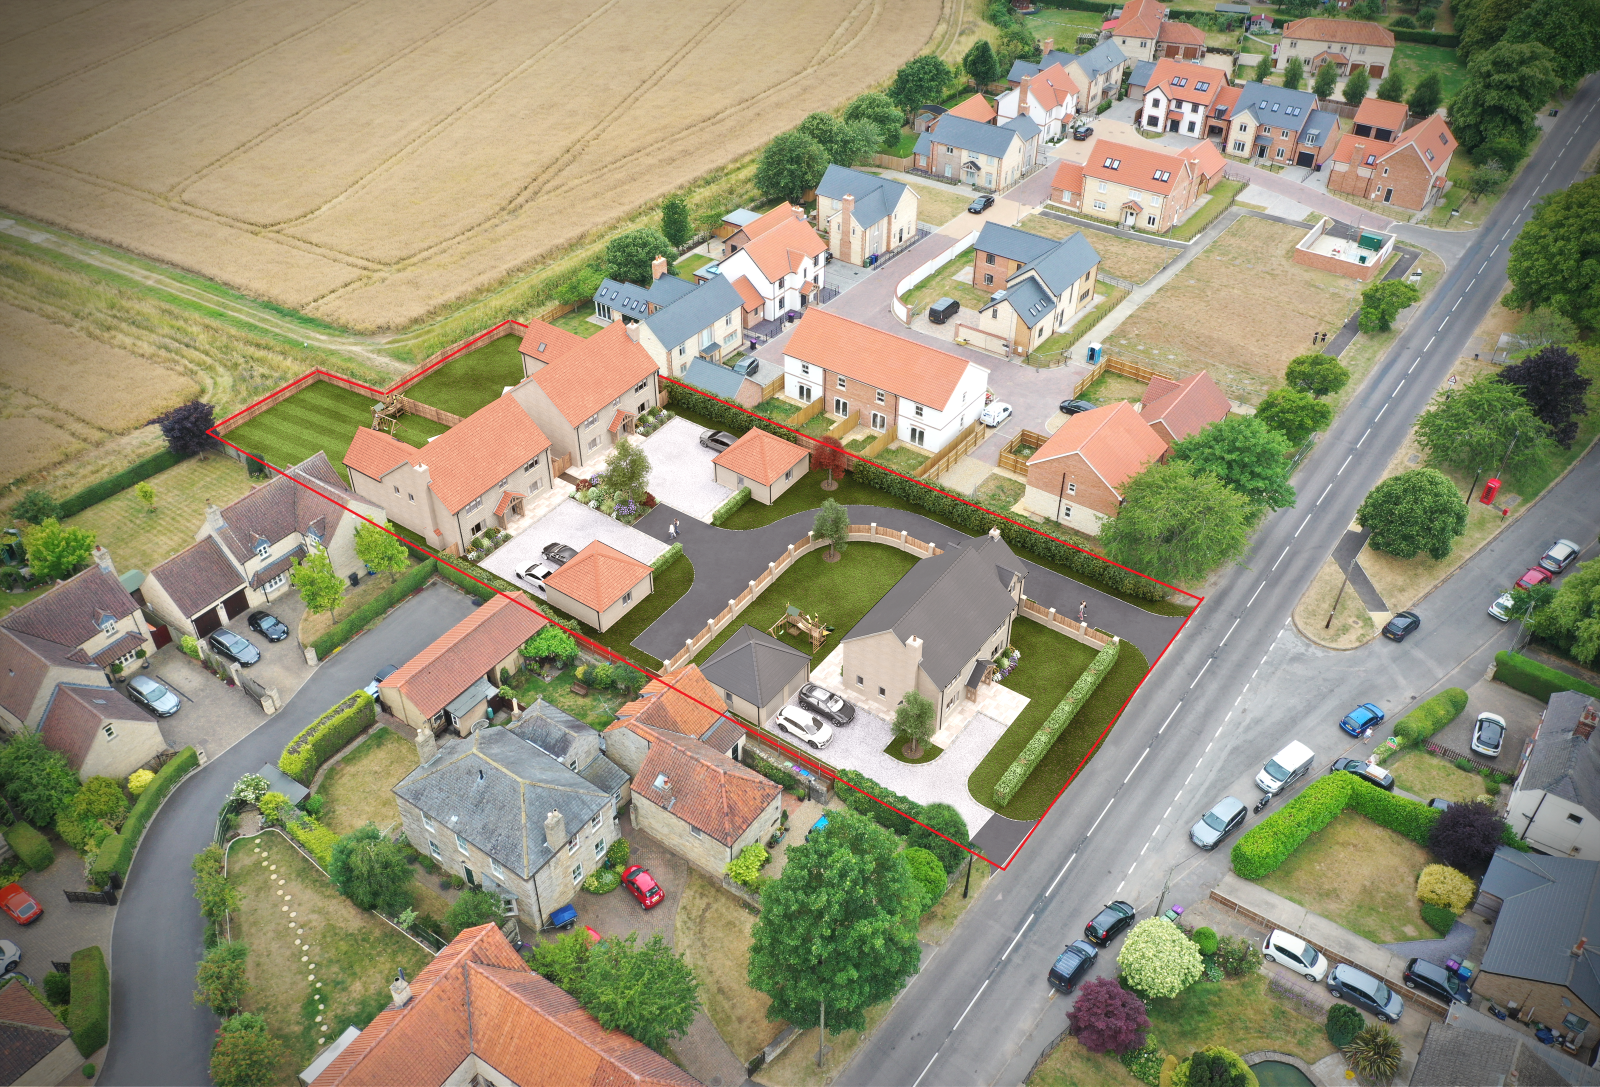 New Homes Approved - December 2022 - Scampton, Lincoln.